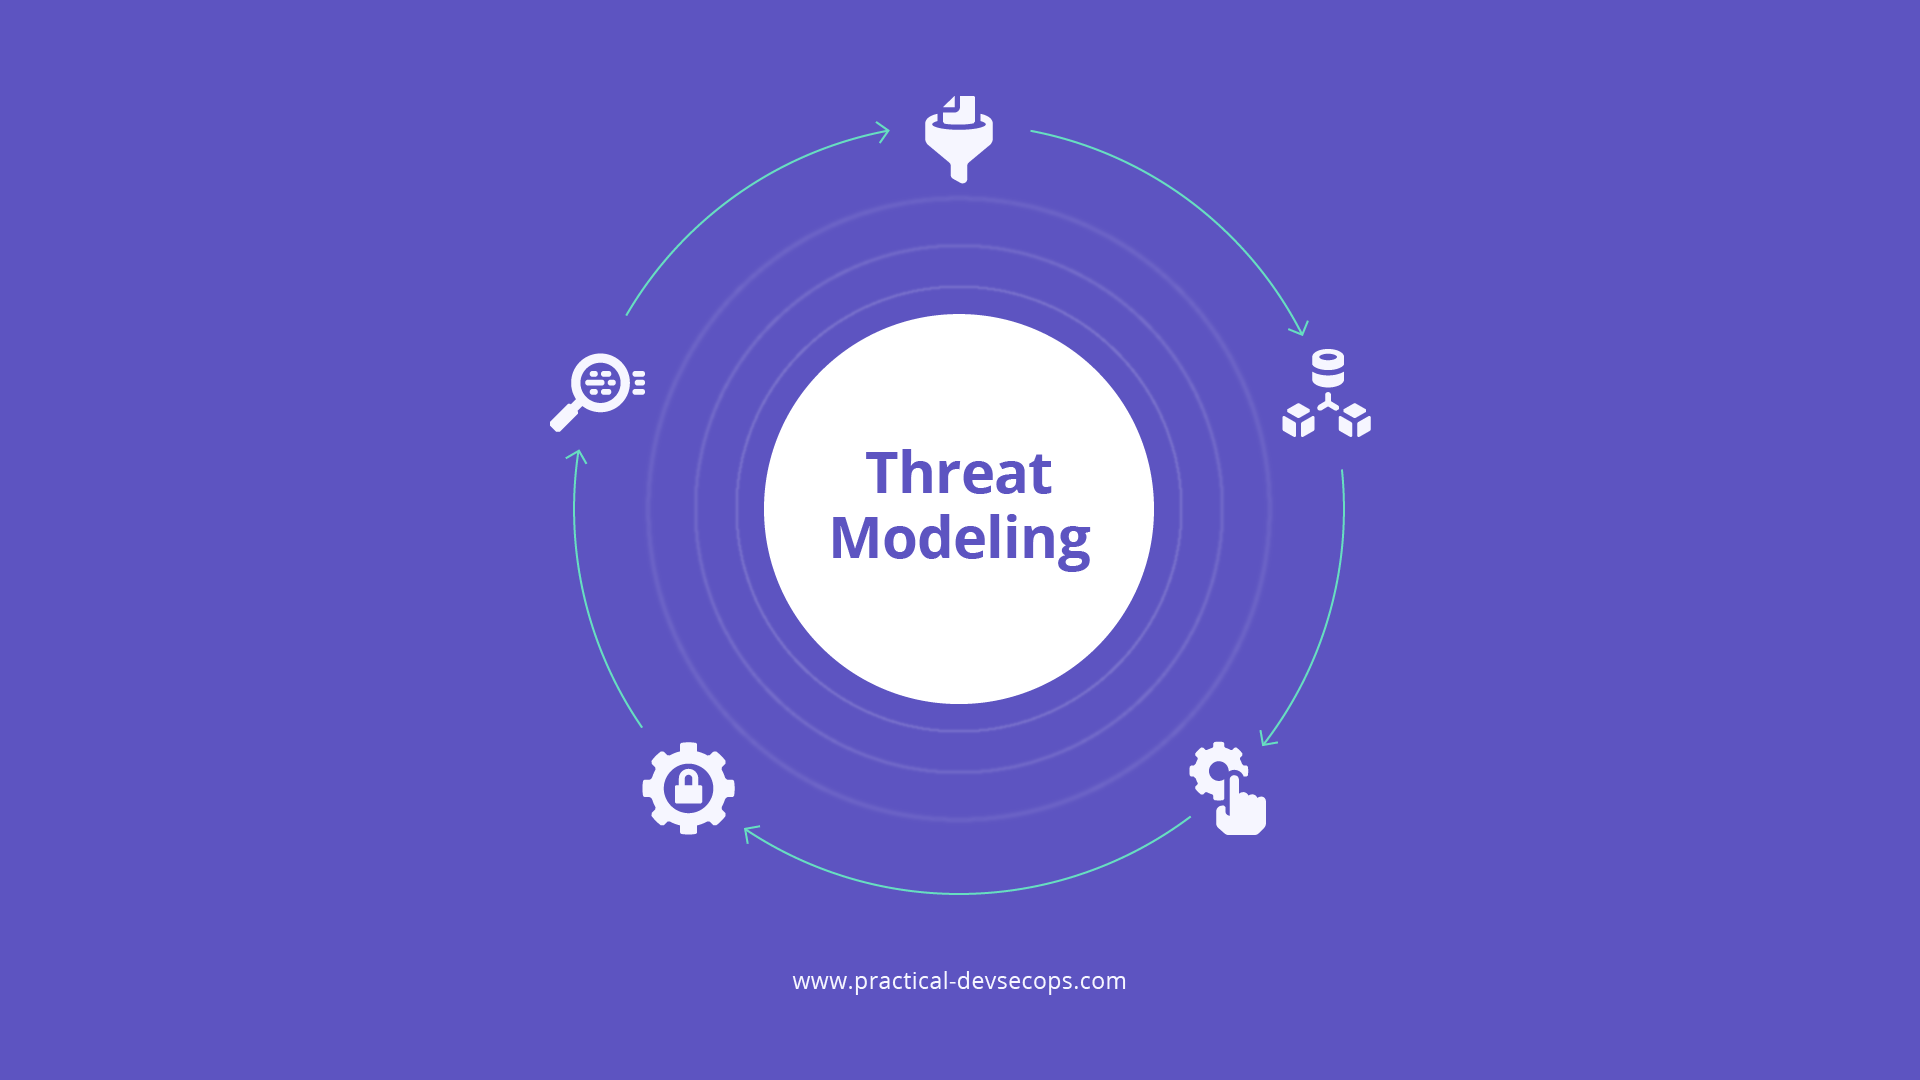 What Is Threat Modeling And How Does It Help?